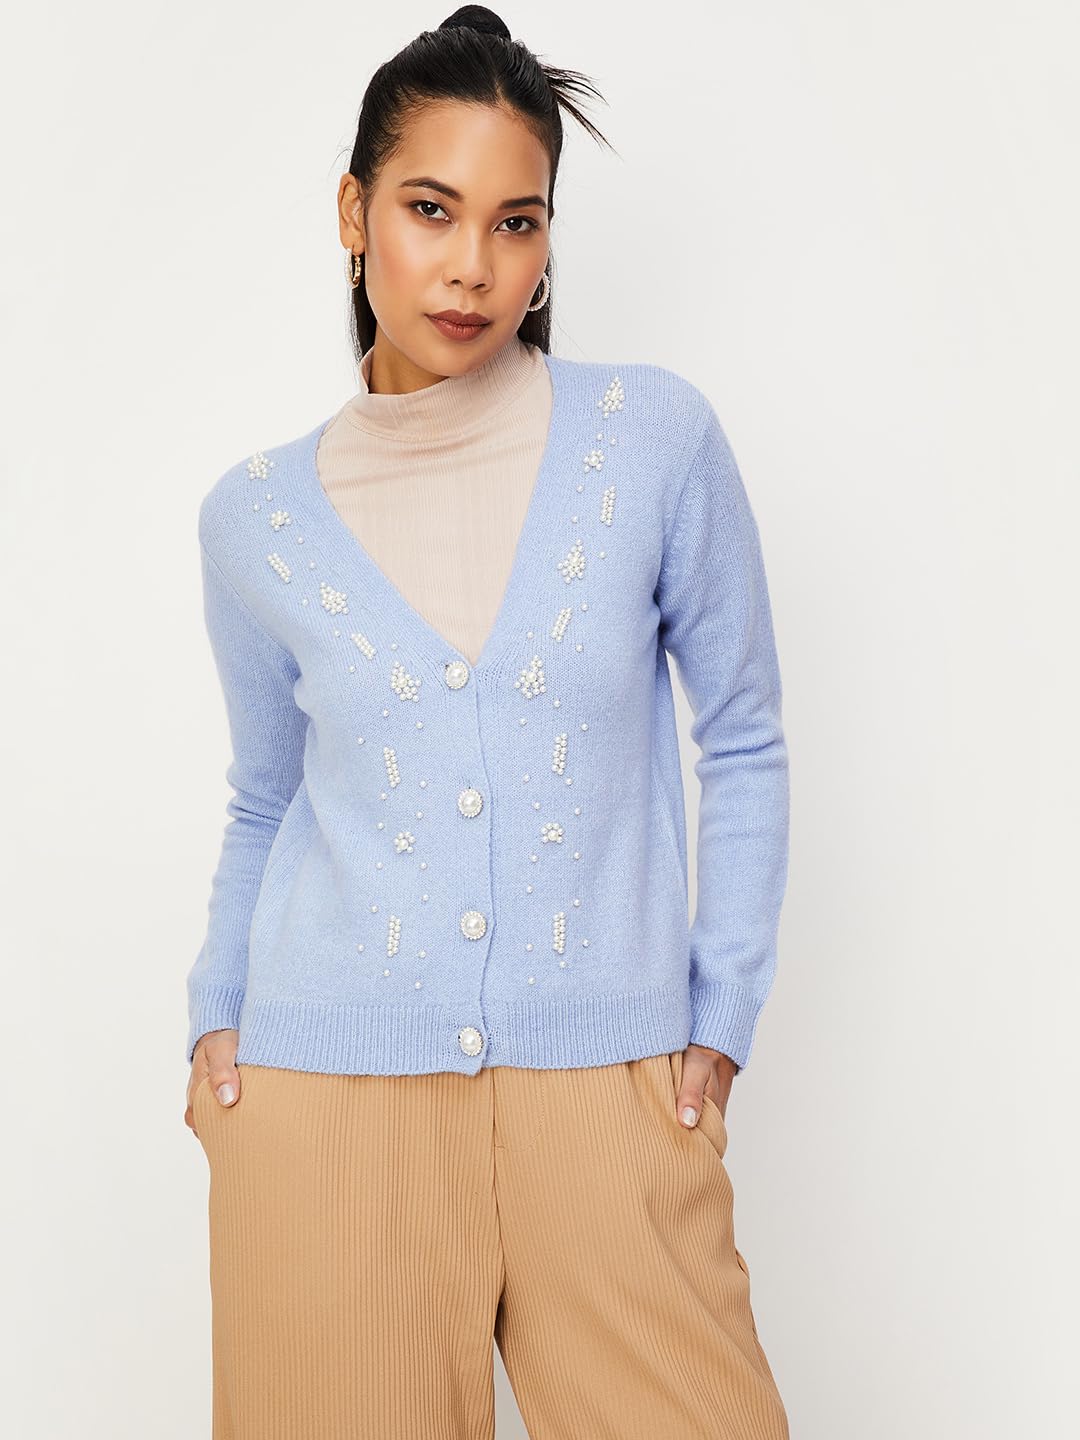 Max Women's Polyester Blend Casual Cardigan Sweater (DFS3010_Light Blue